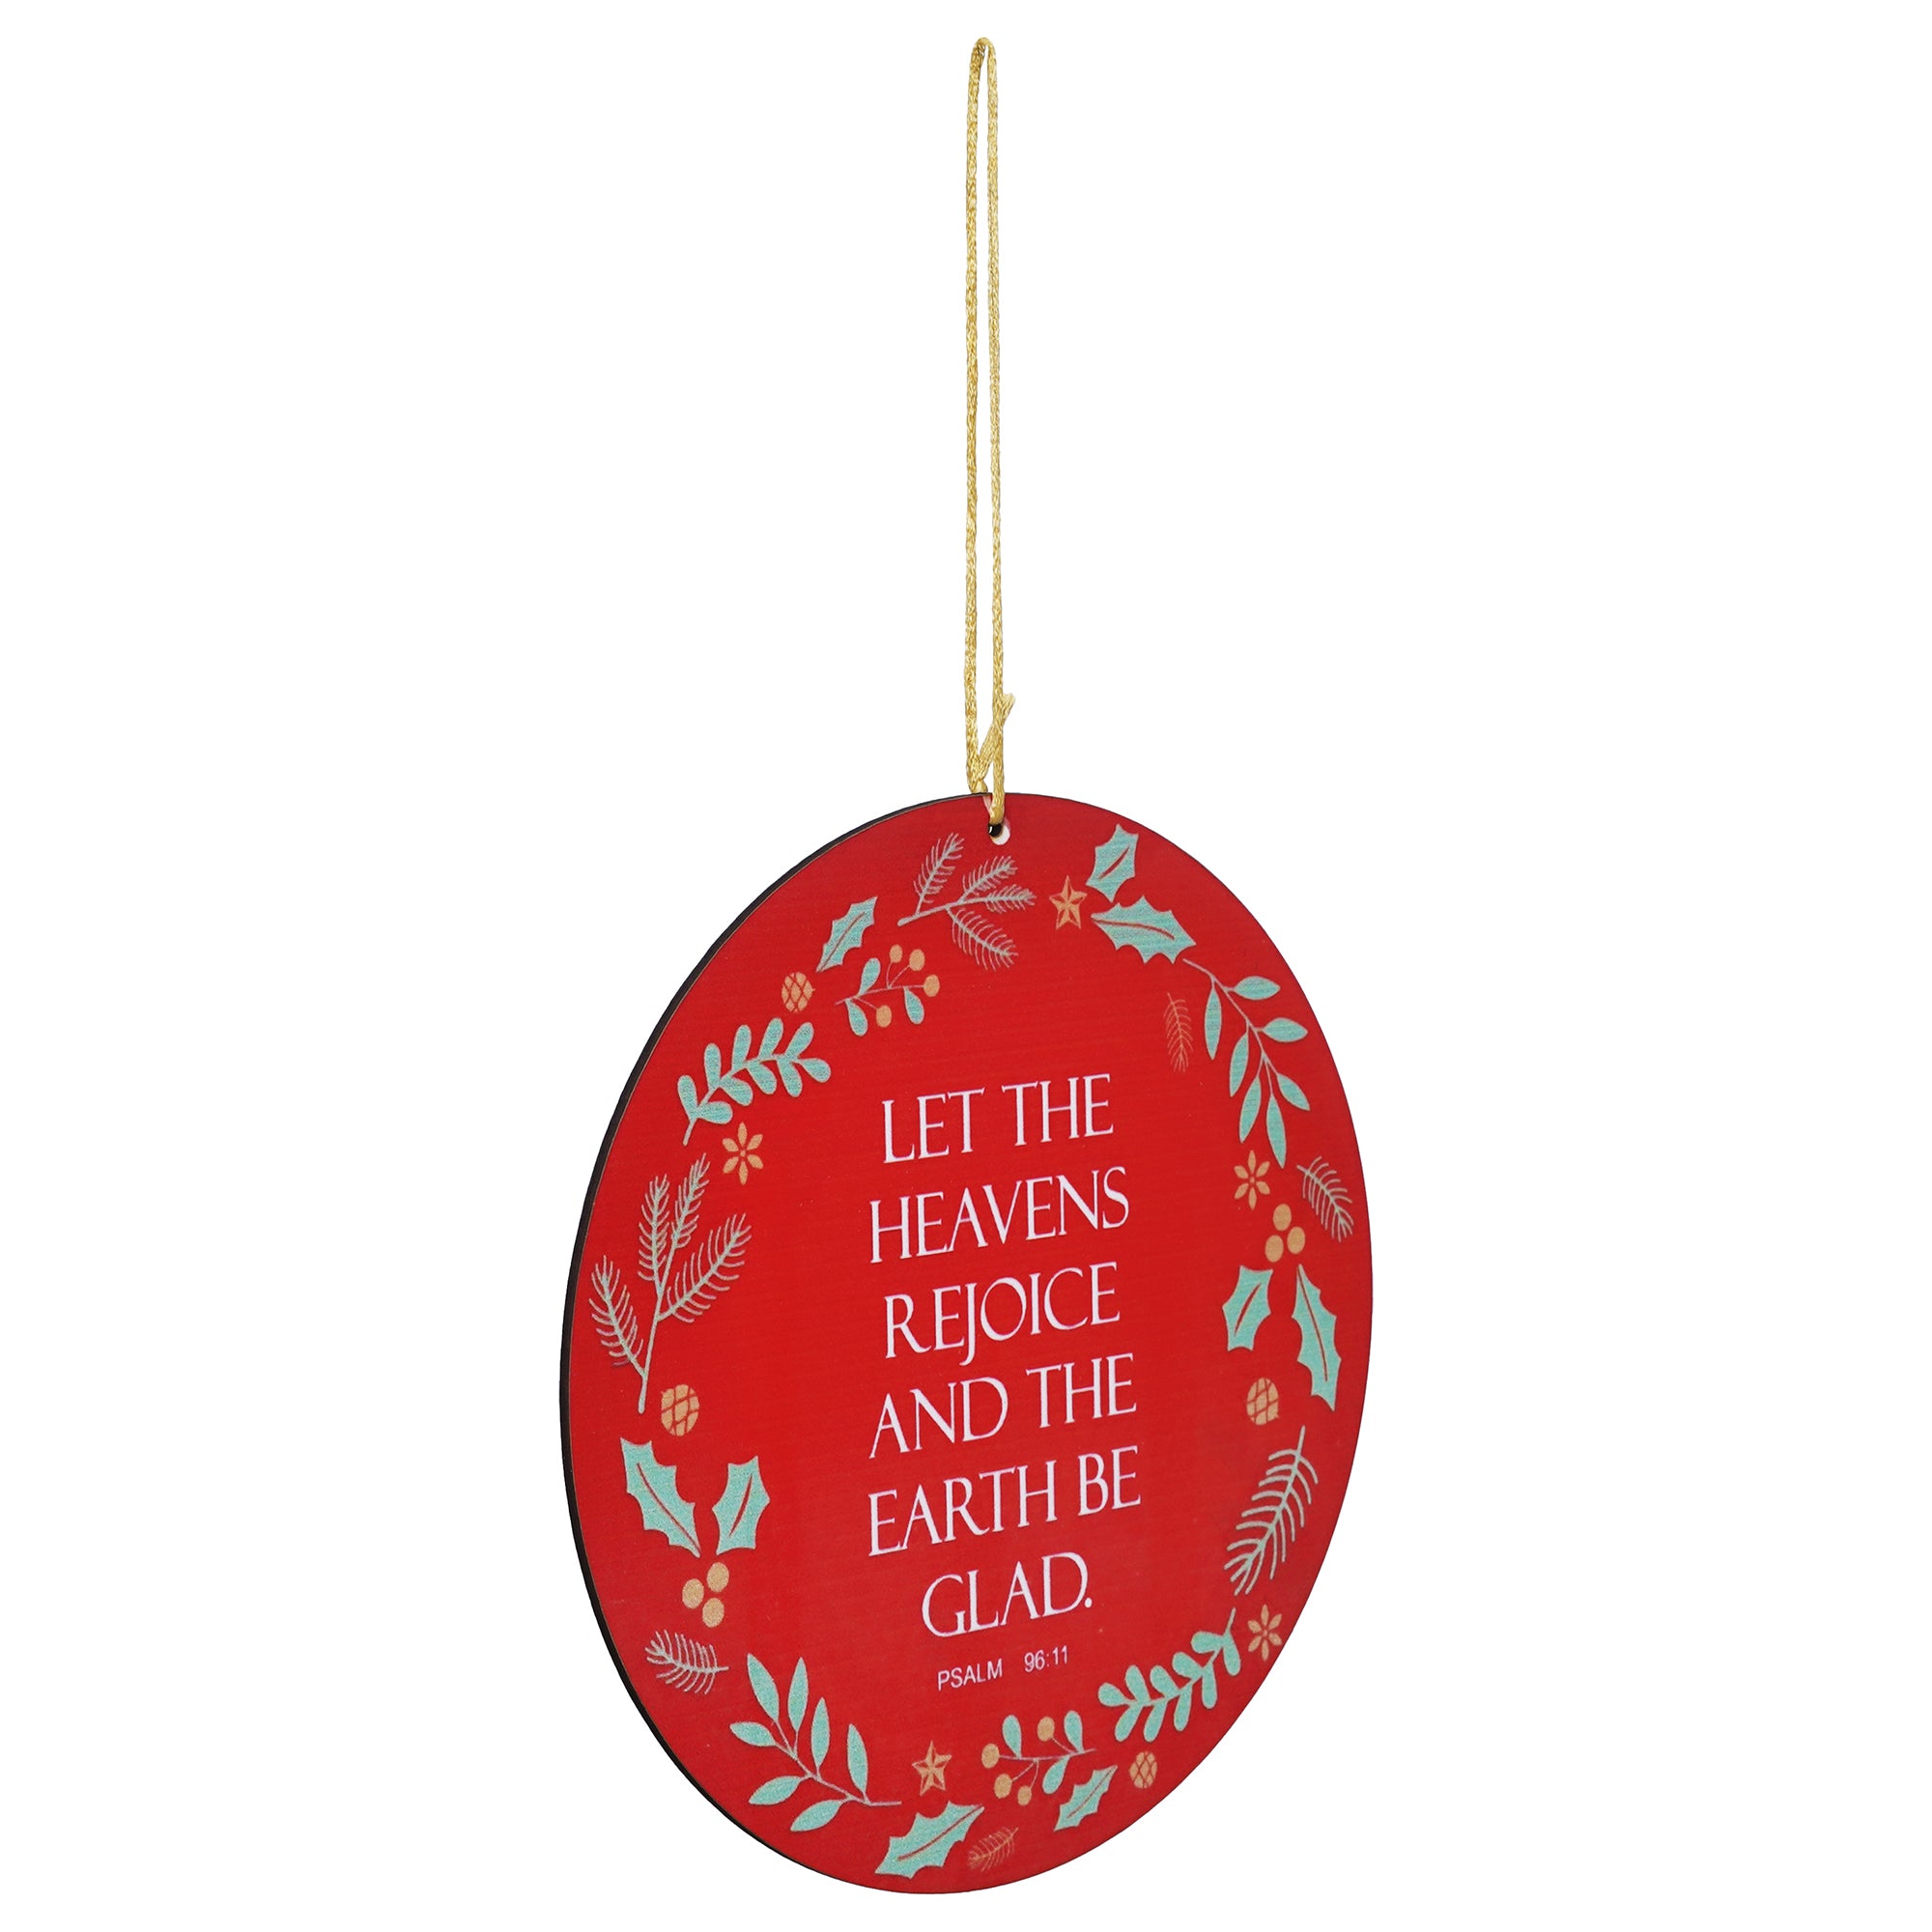 eCraftIndia "LET THE HEAVENS REJOICE AND THE EARTH BE GLAD. PSALM 96:11" Printed Merry Christmas Wooden Door Wall Hanging Ornaments for Home Decoration (Red, Green, White) 6